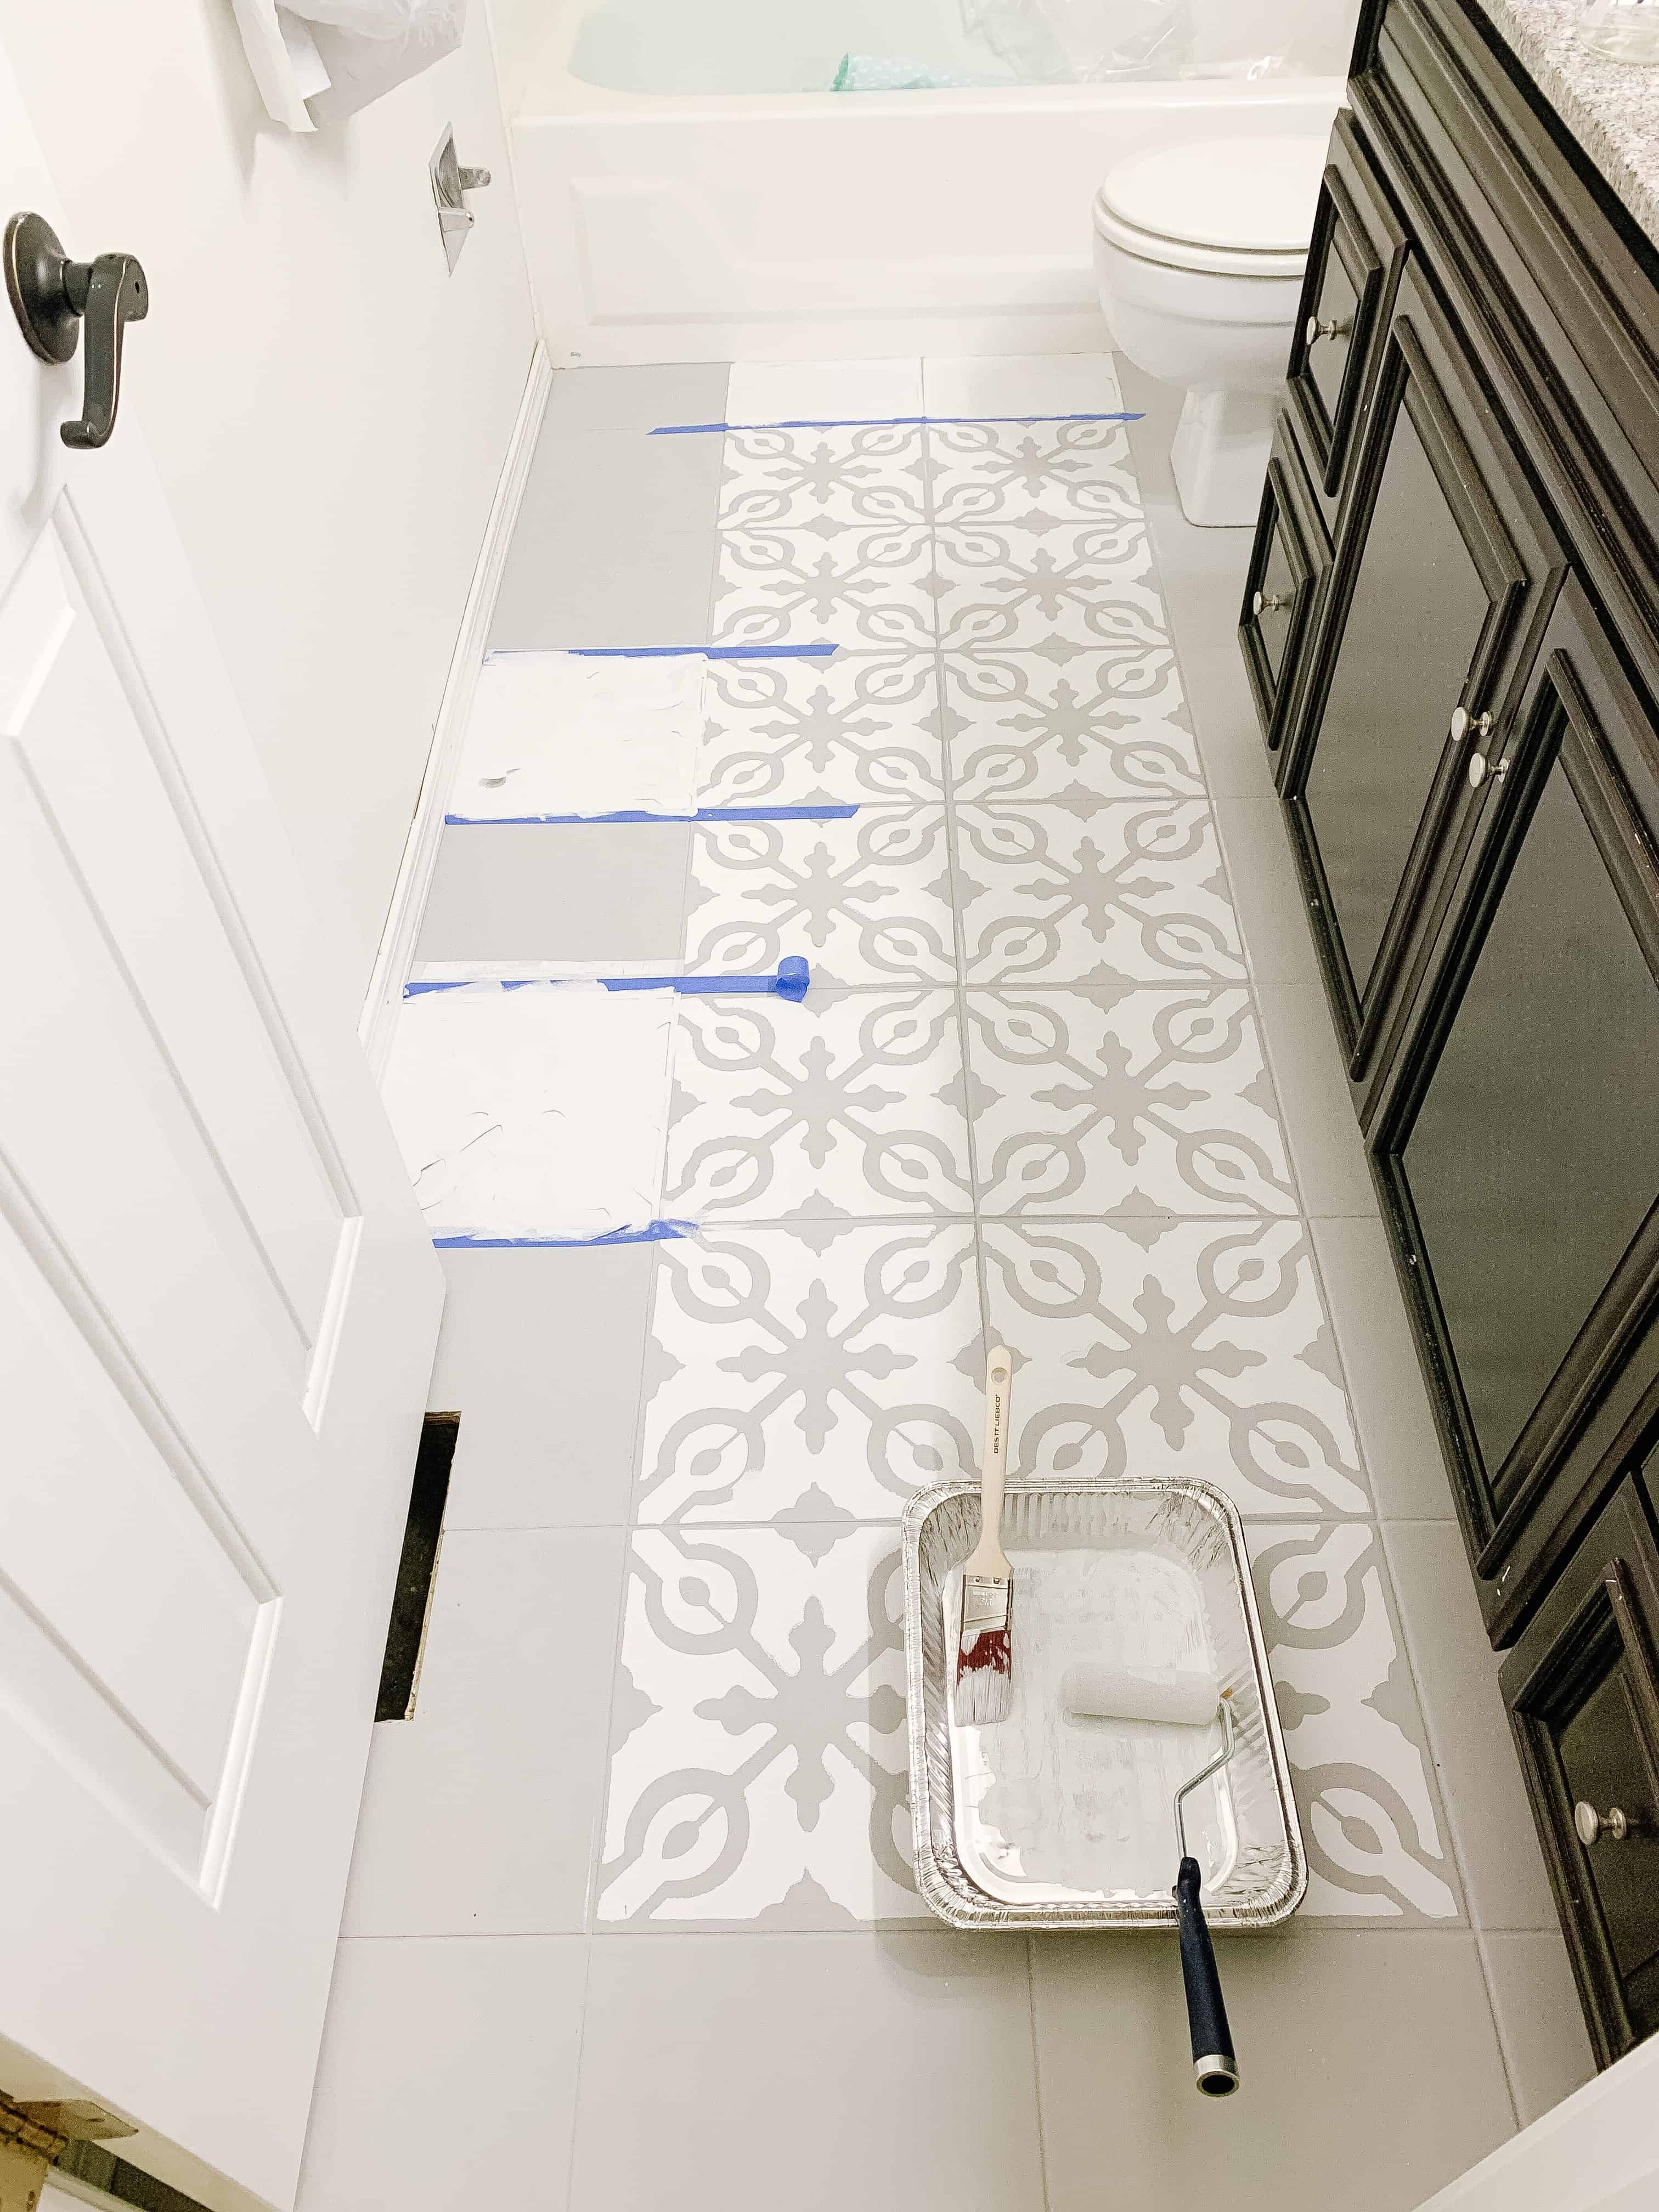 Painted Tile Floors with stencil